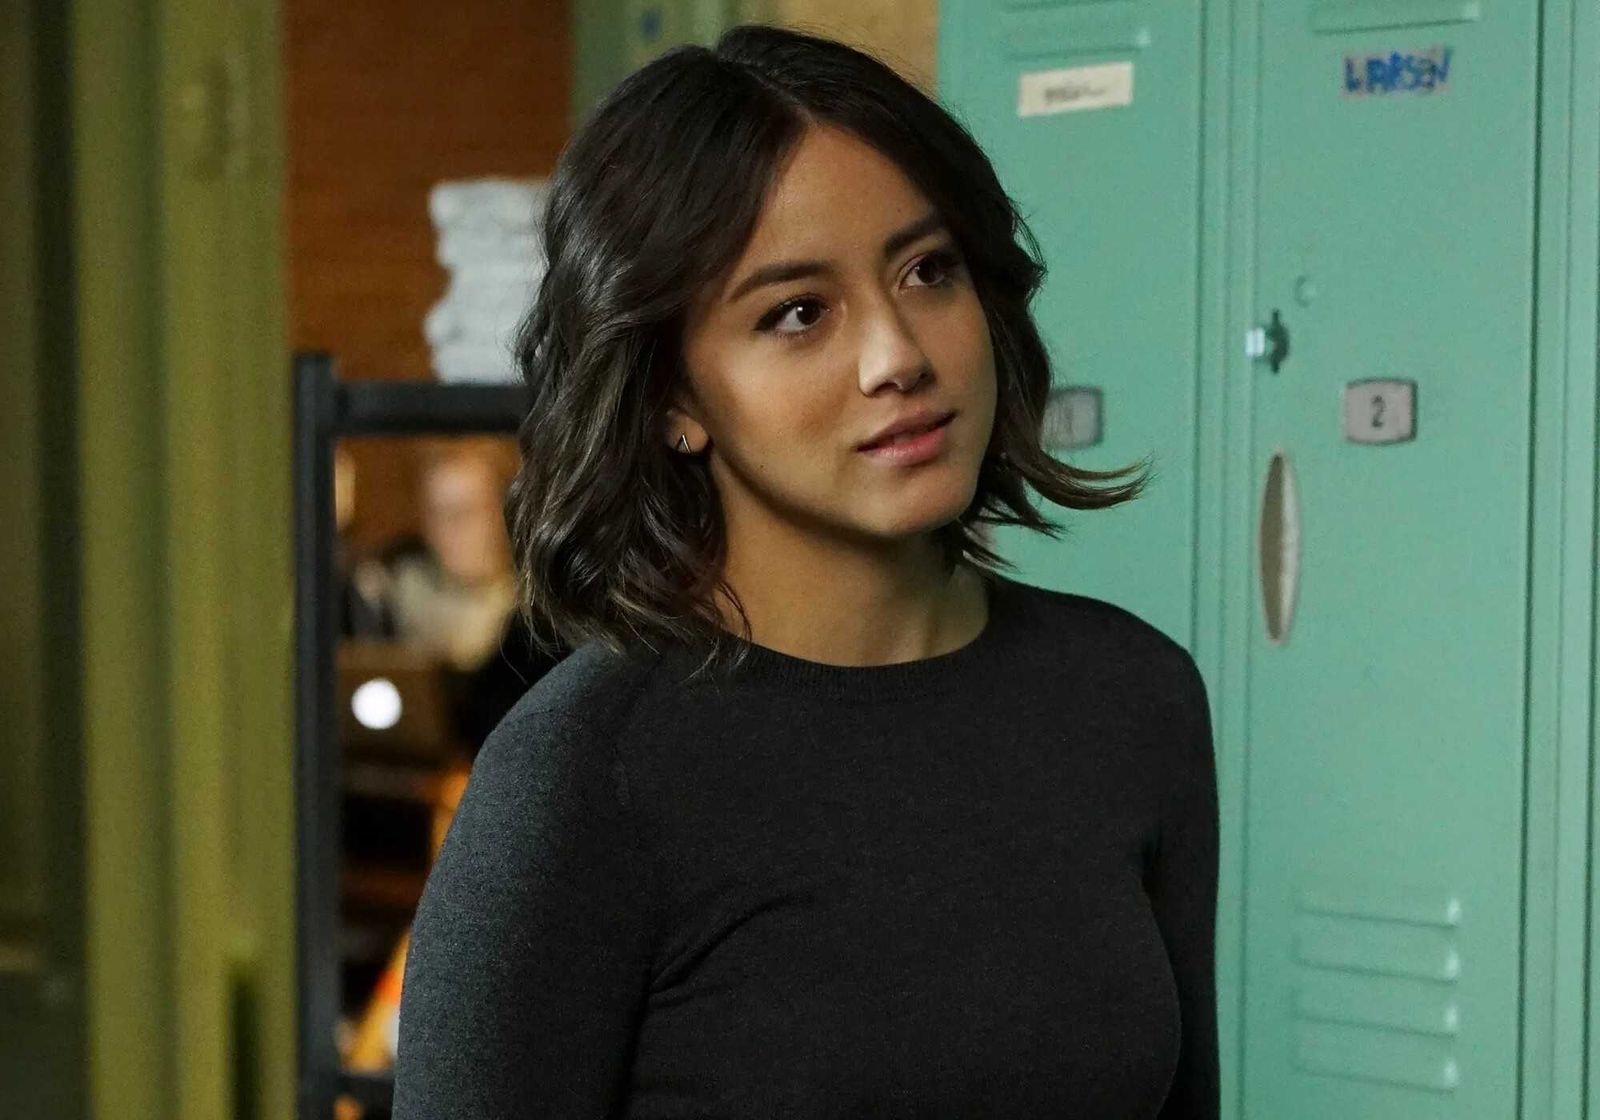 Chloe Bennet in 'Agents of S.H.I.E.L.D.' (2013) (Source: TeenVogue)